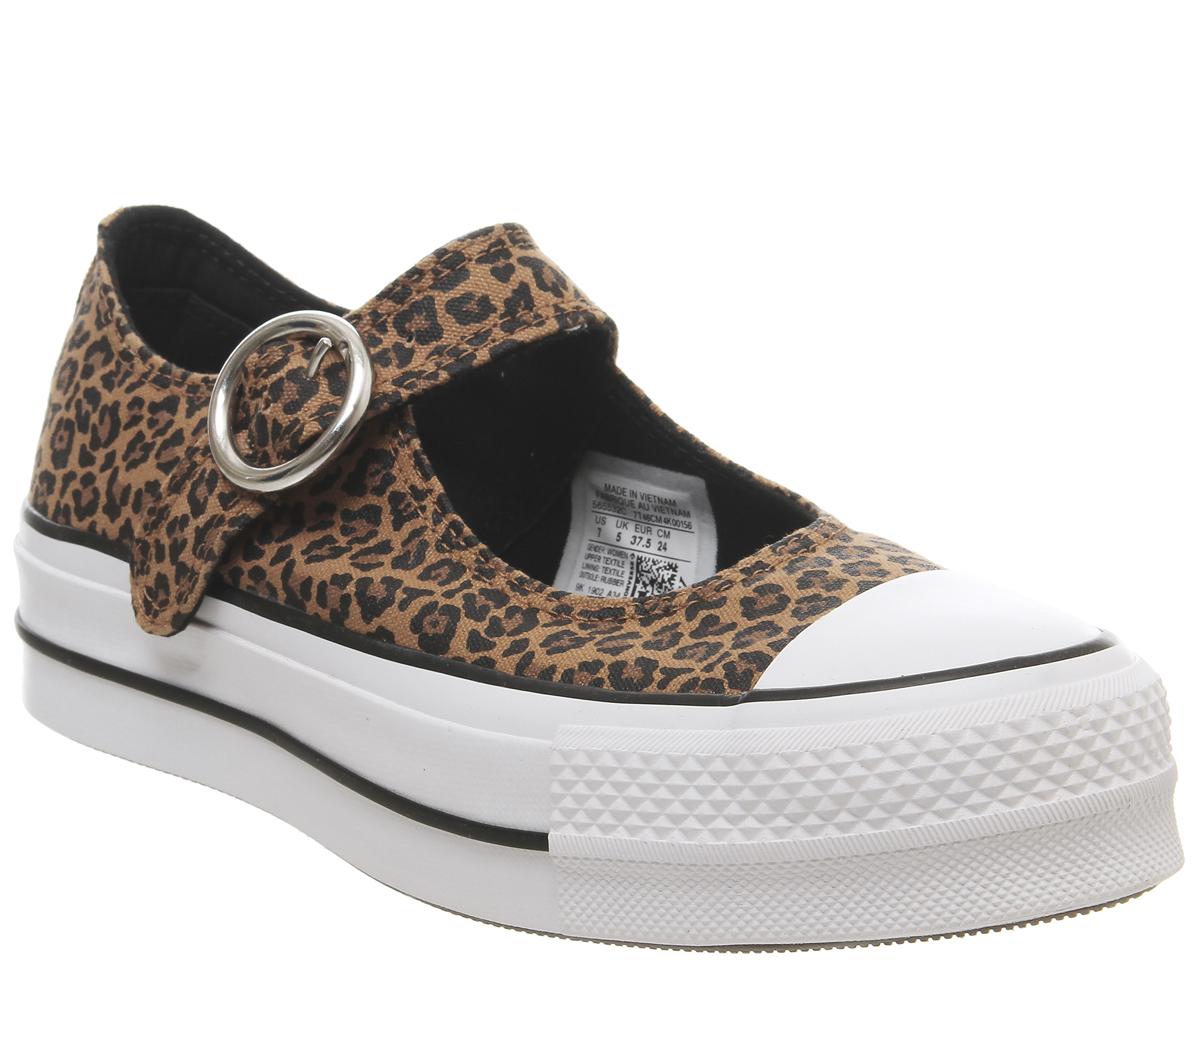 ConverseAll Star Mary Jane Ox TrainersLeopard White Exclusive